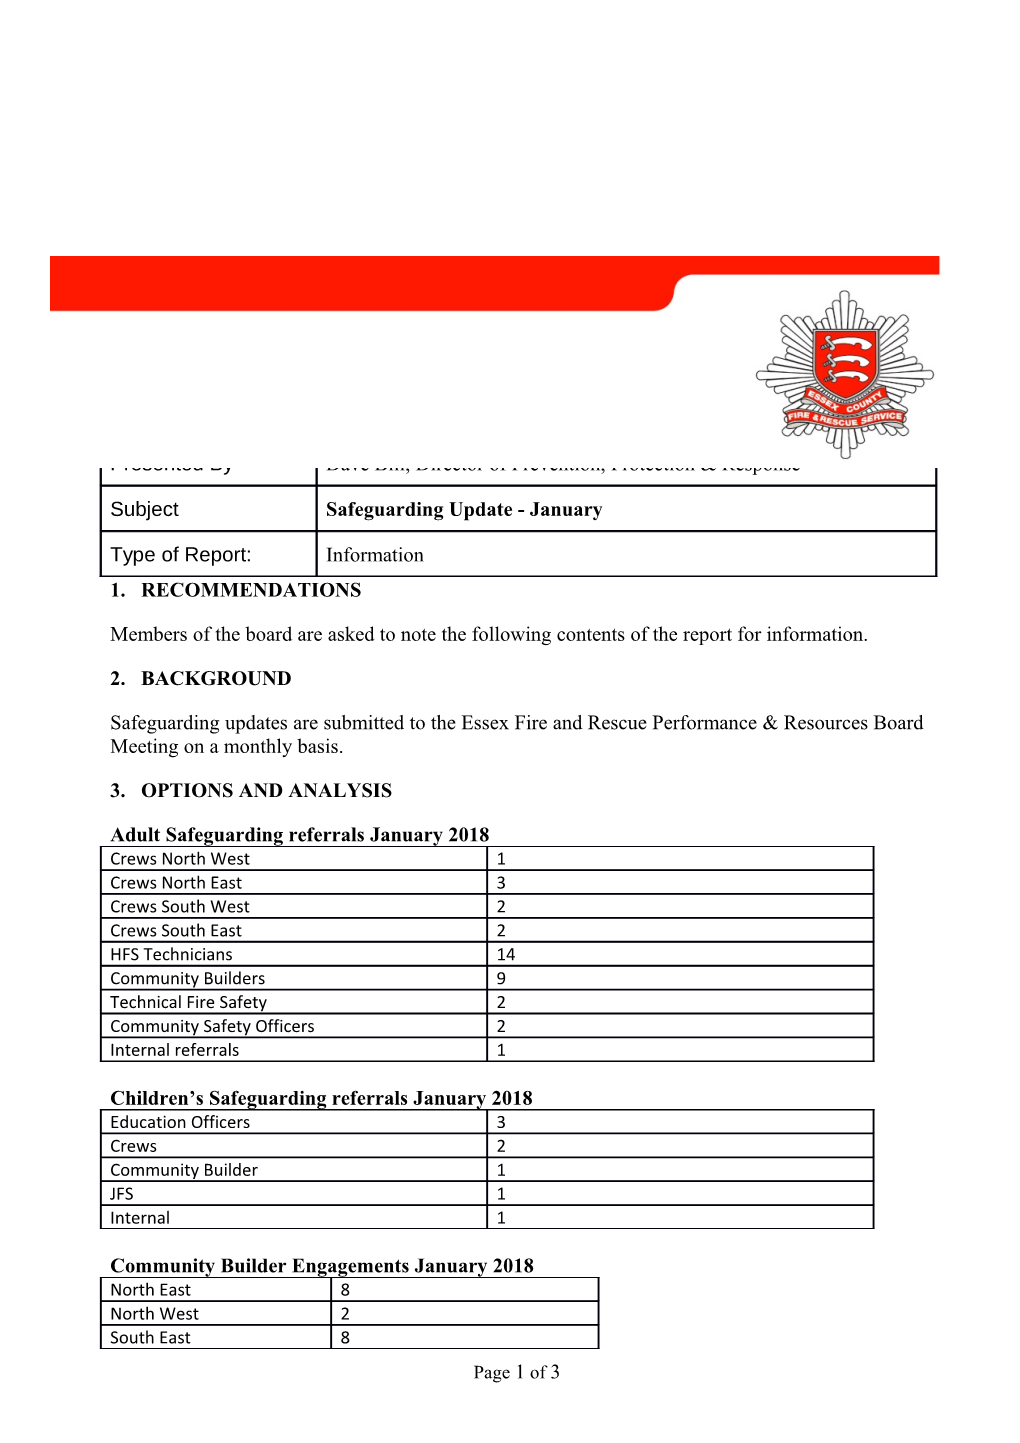 Members of the Board Are Asked to Note the Following Contents of the Report for Information